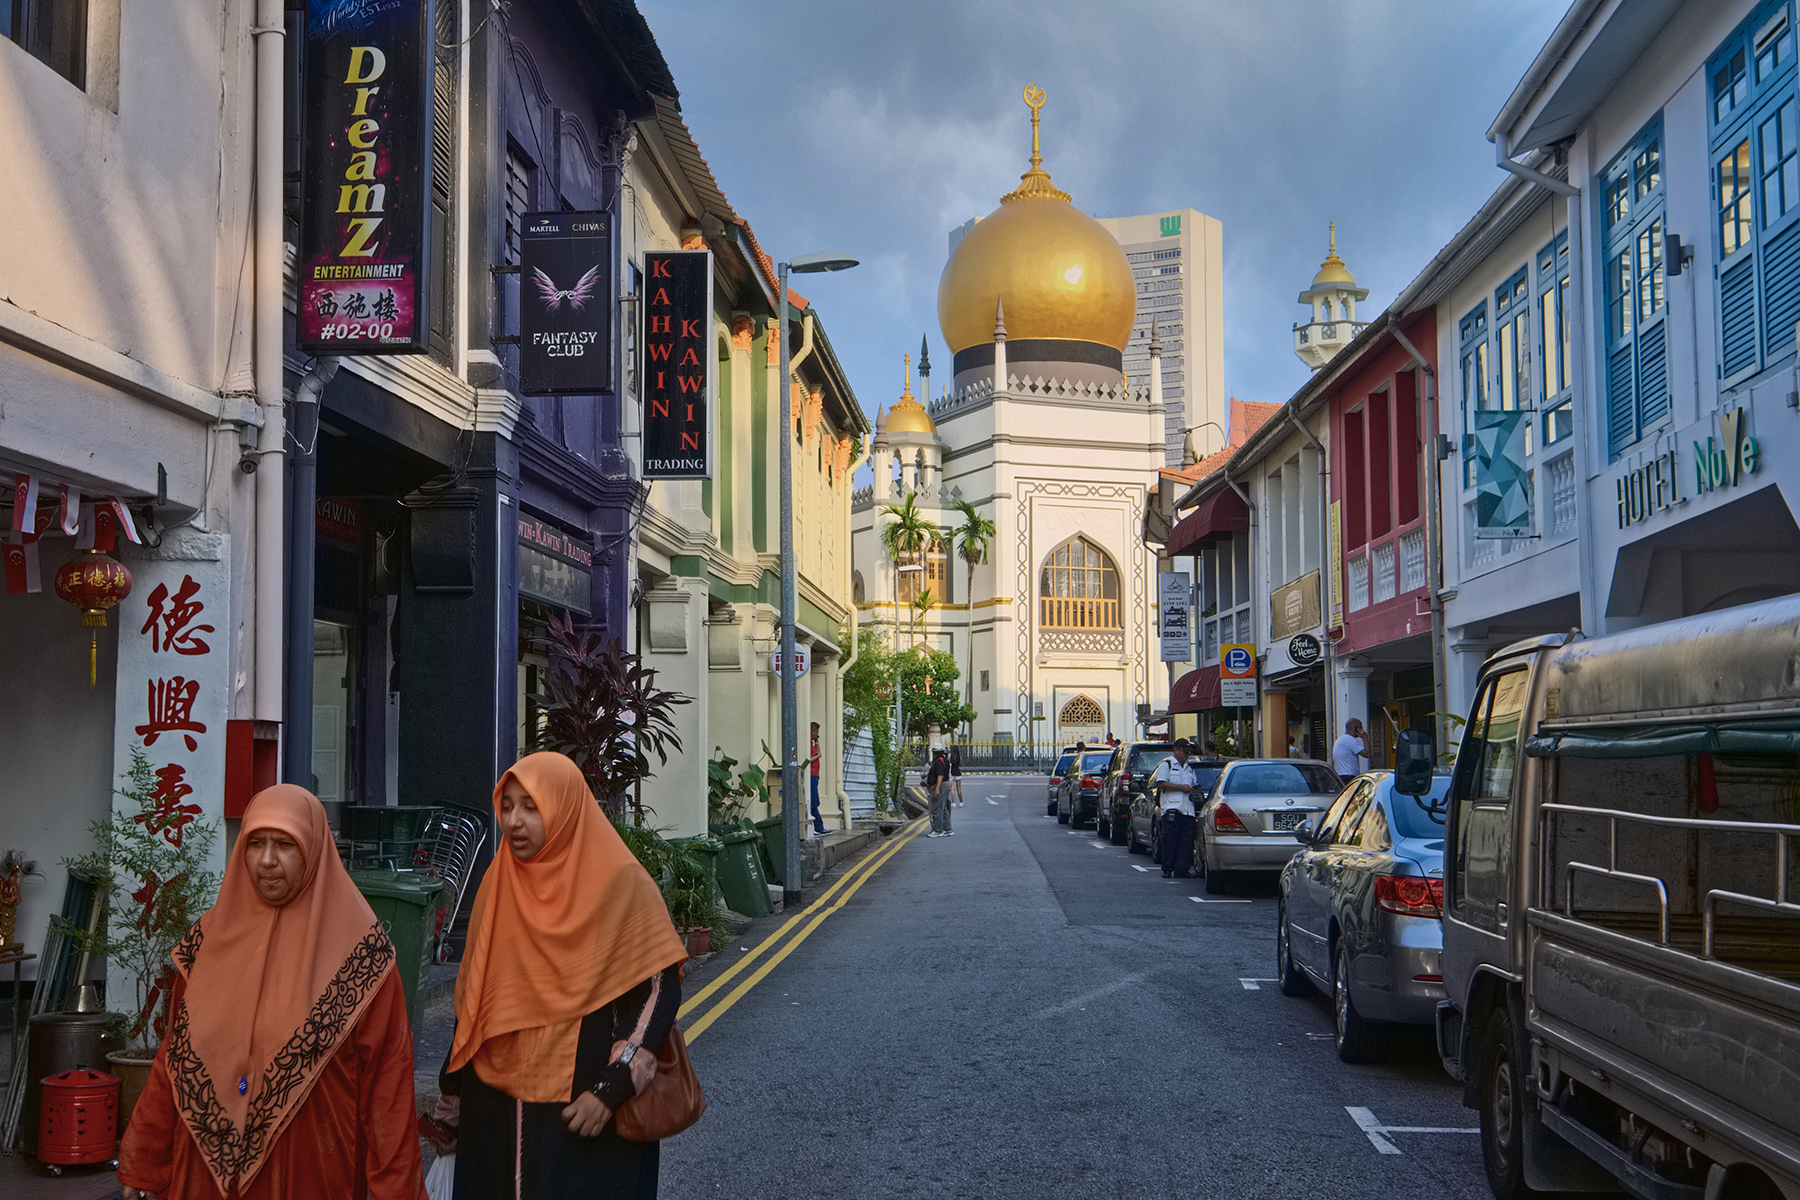 Women walking down the street in Kampong Glam, with the Sultan Mosque in the background.